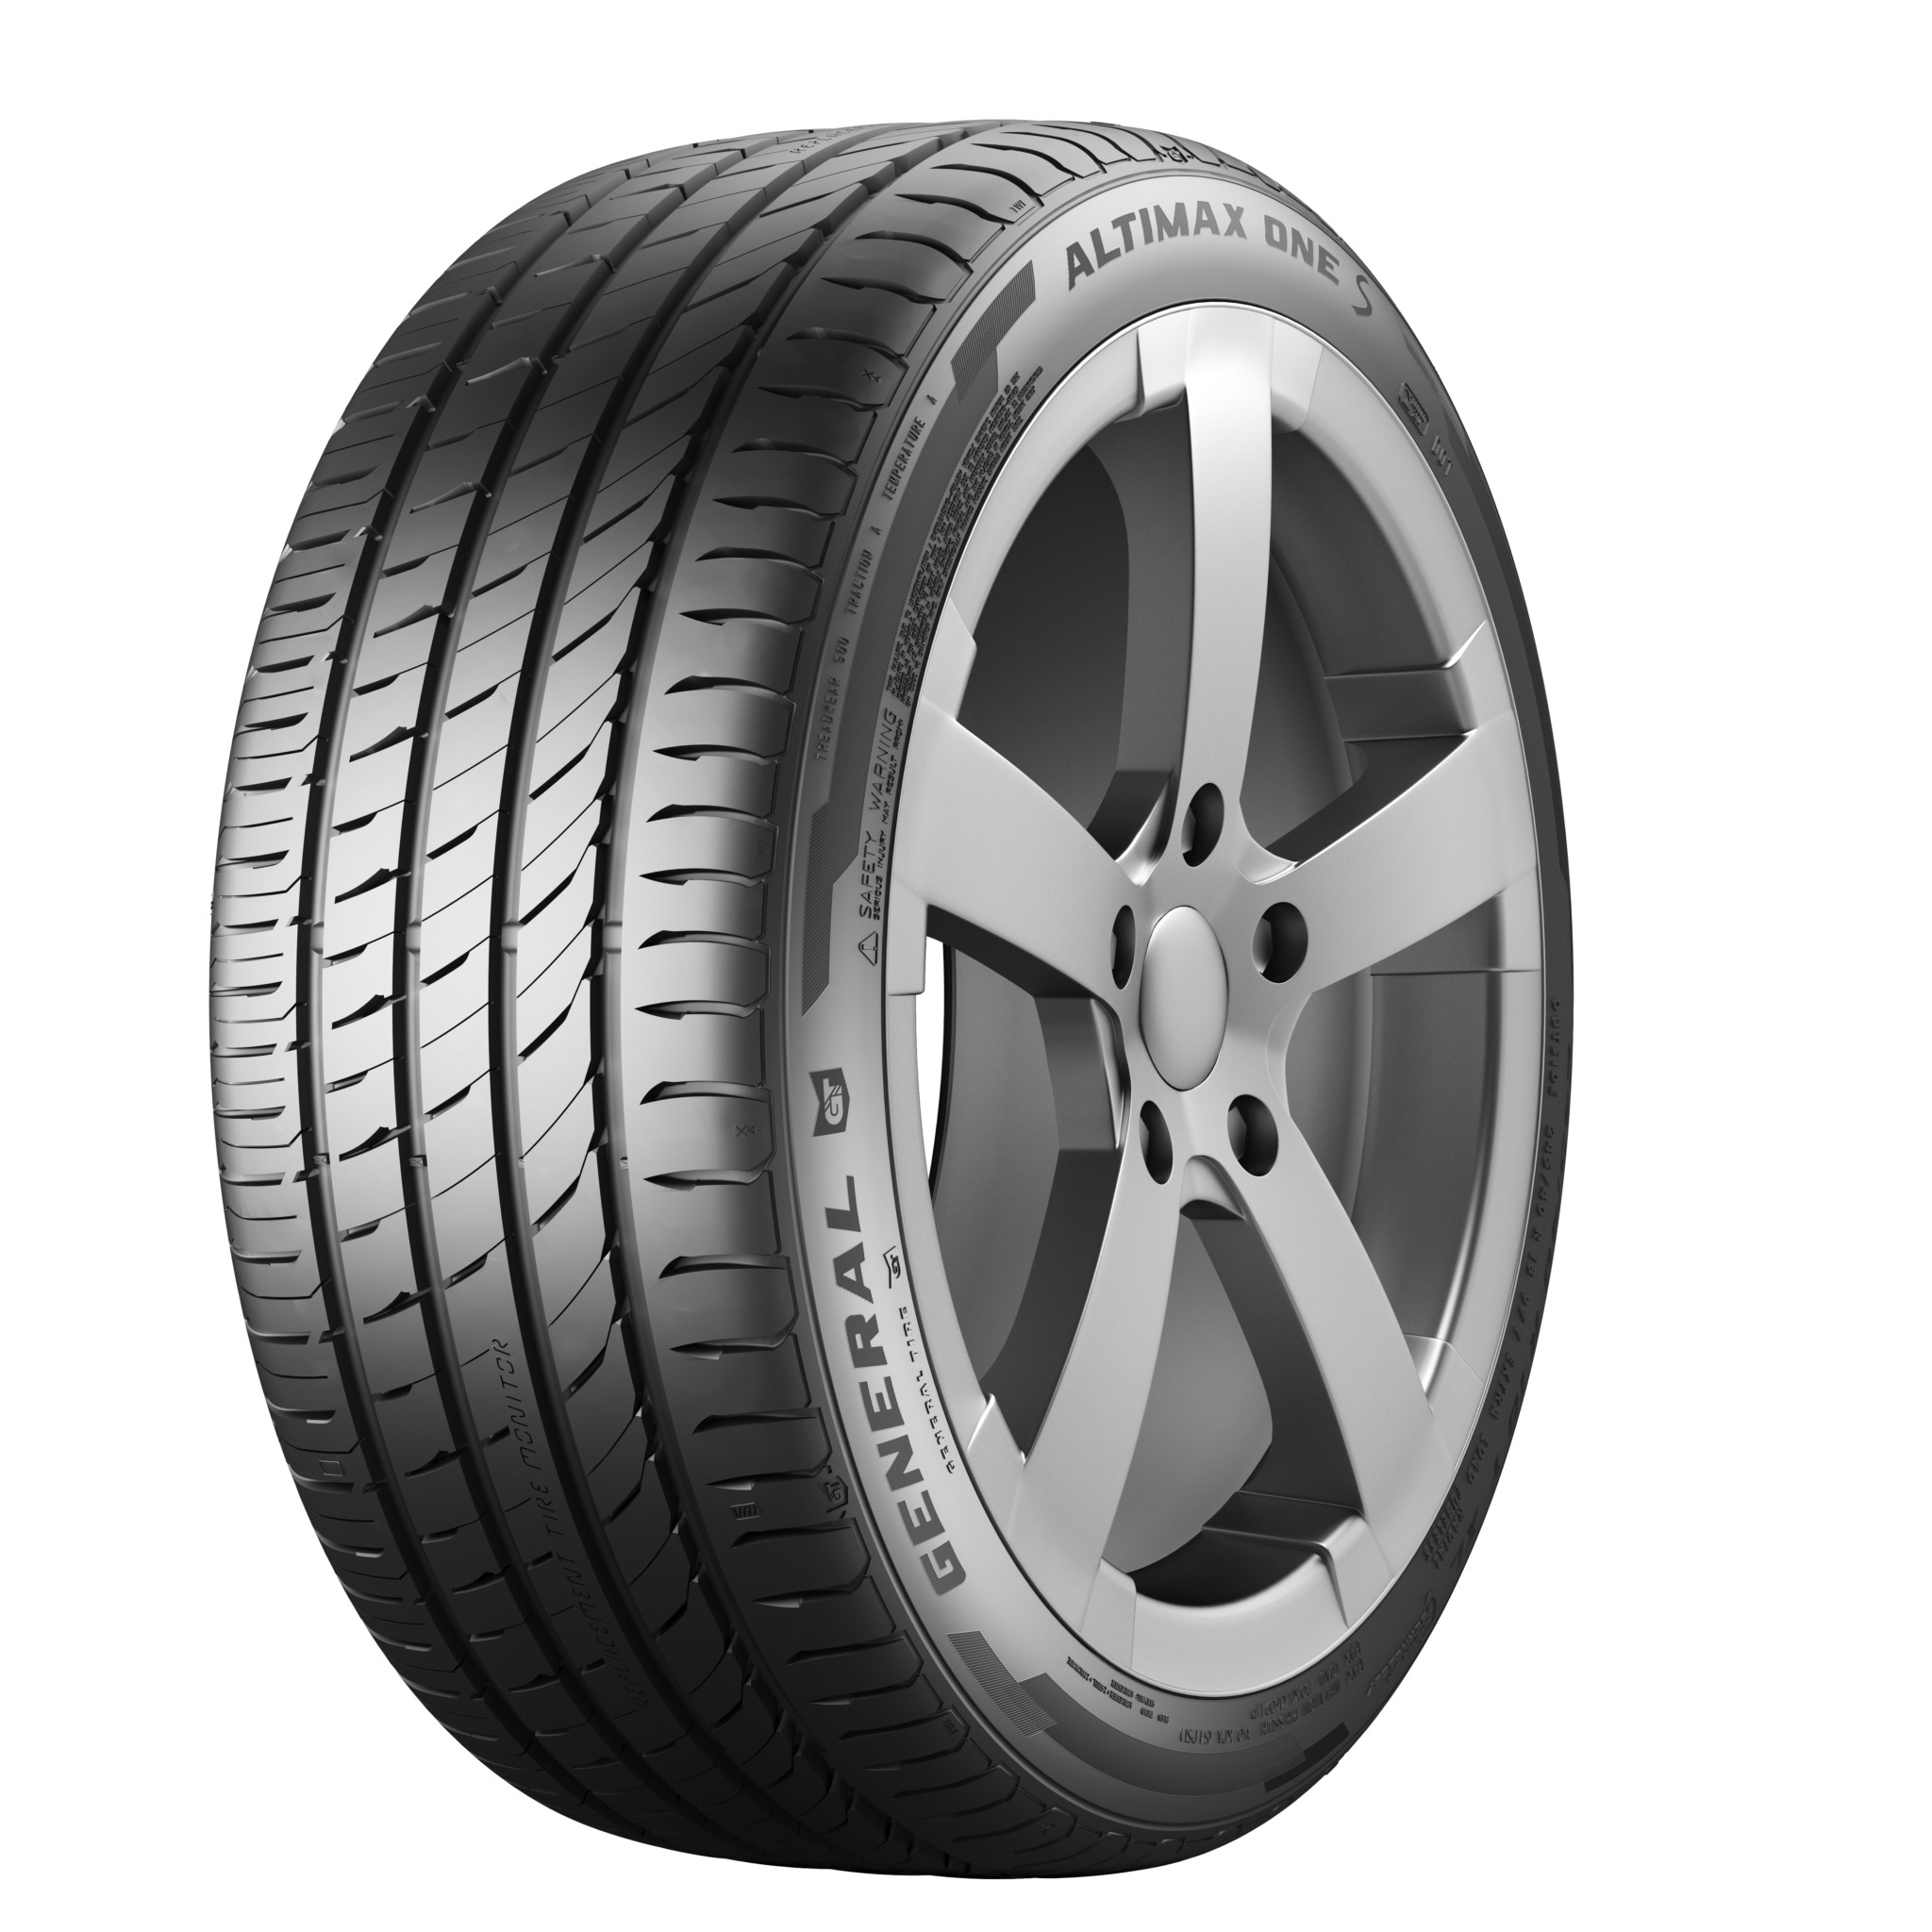 General Tire Altimax One S available now in 15-20” sizes